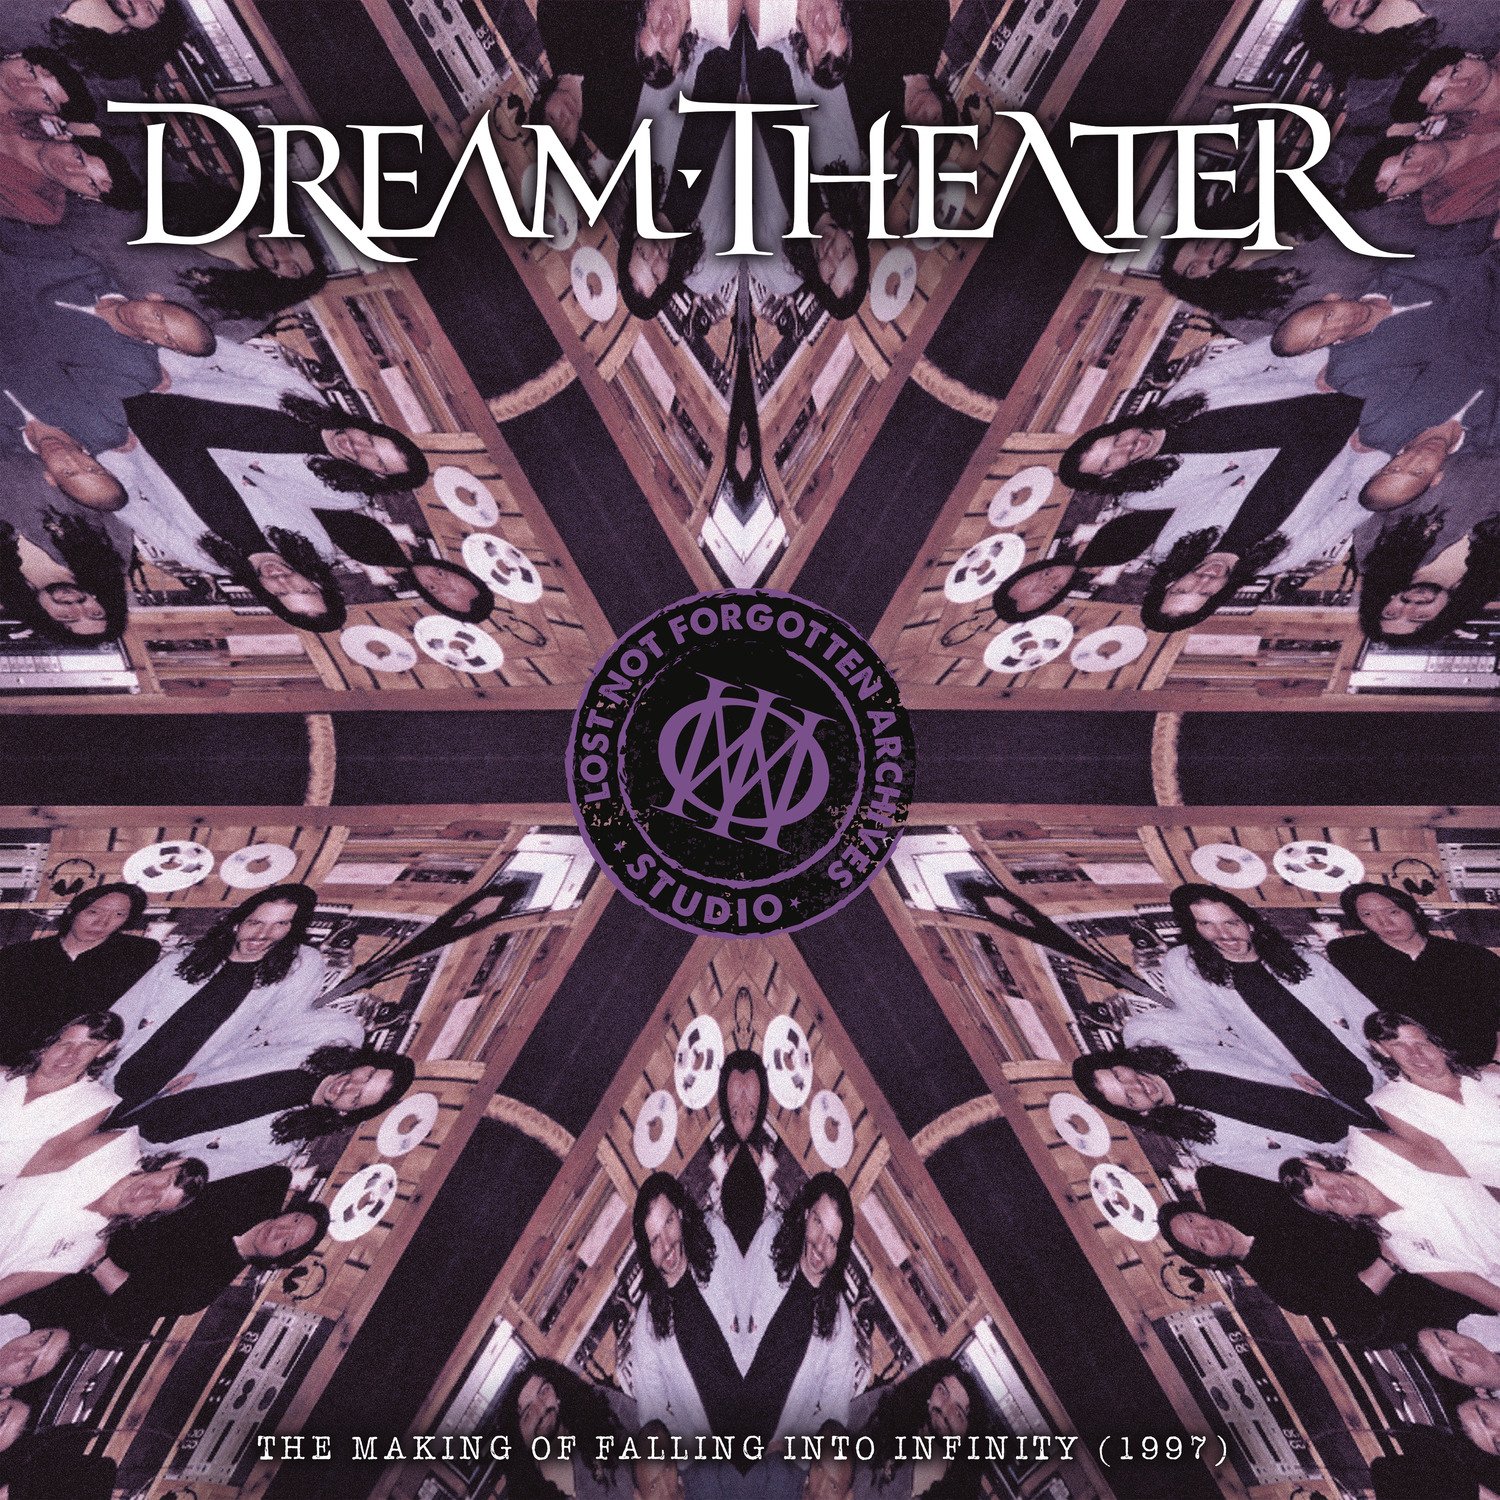 CD Shop - DREAM THEATER LOST NOT FORGOTTEN ARCHIVES: THE MAKING OF FALLING INTO INFINITY (1997) -LP+CD-